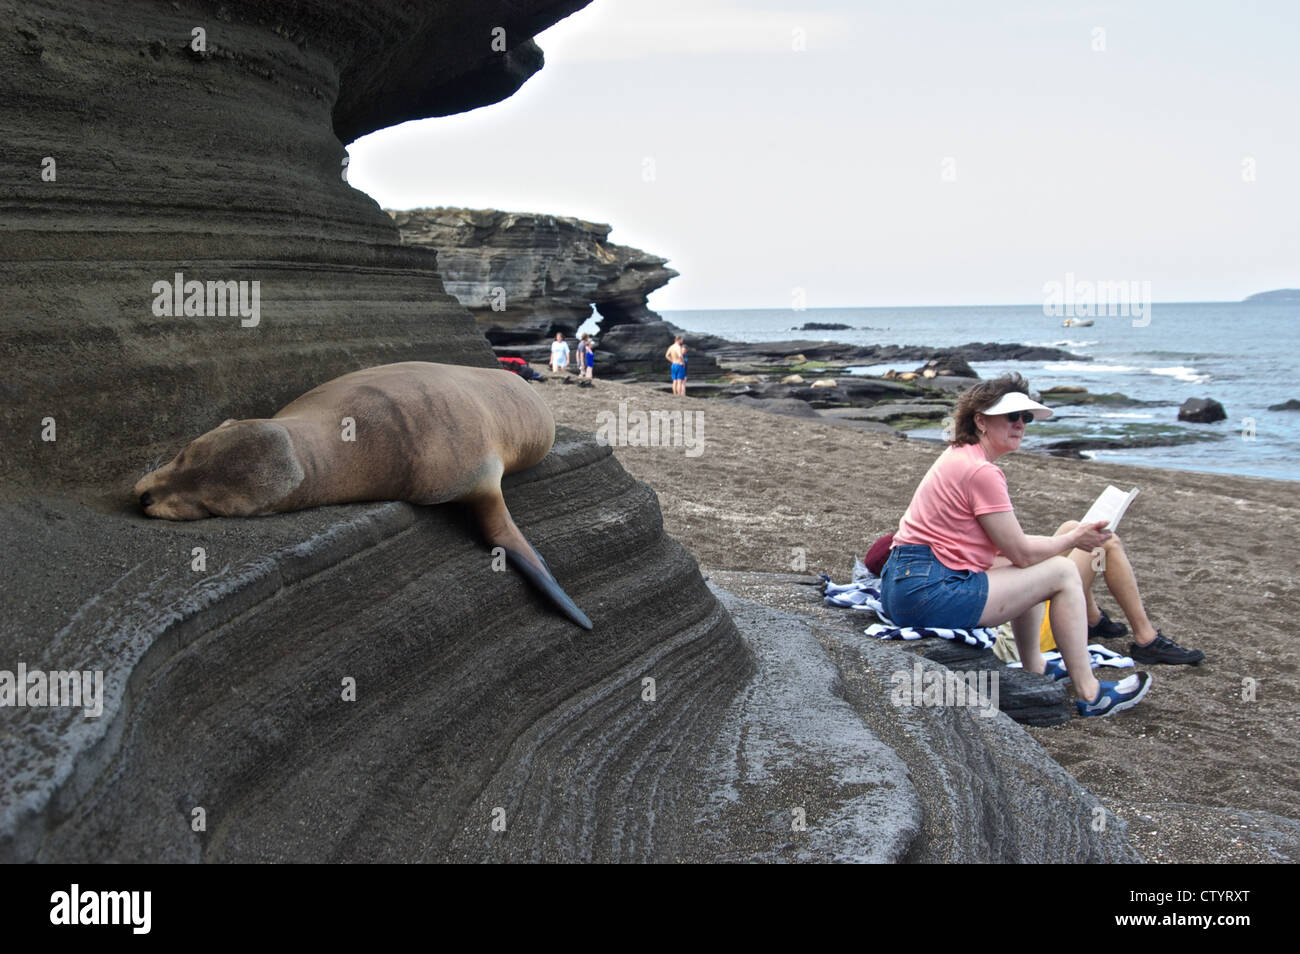 Tourists chilling on the shore close to sea lions. Galapagos, Ecuador. Stock Photo